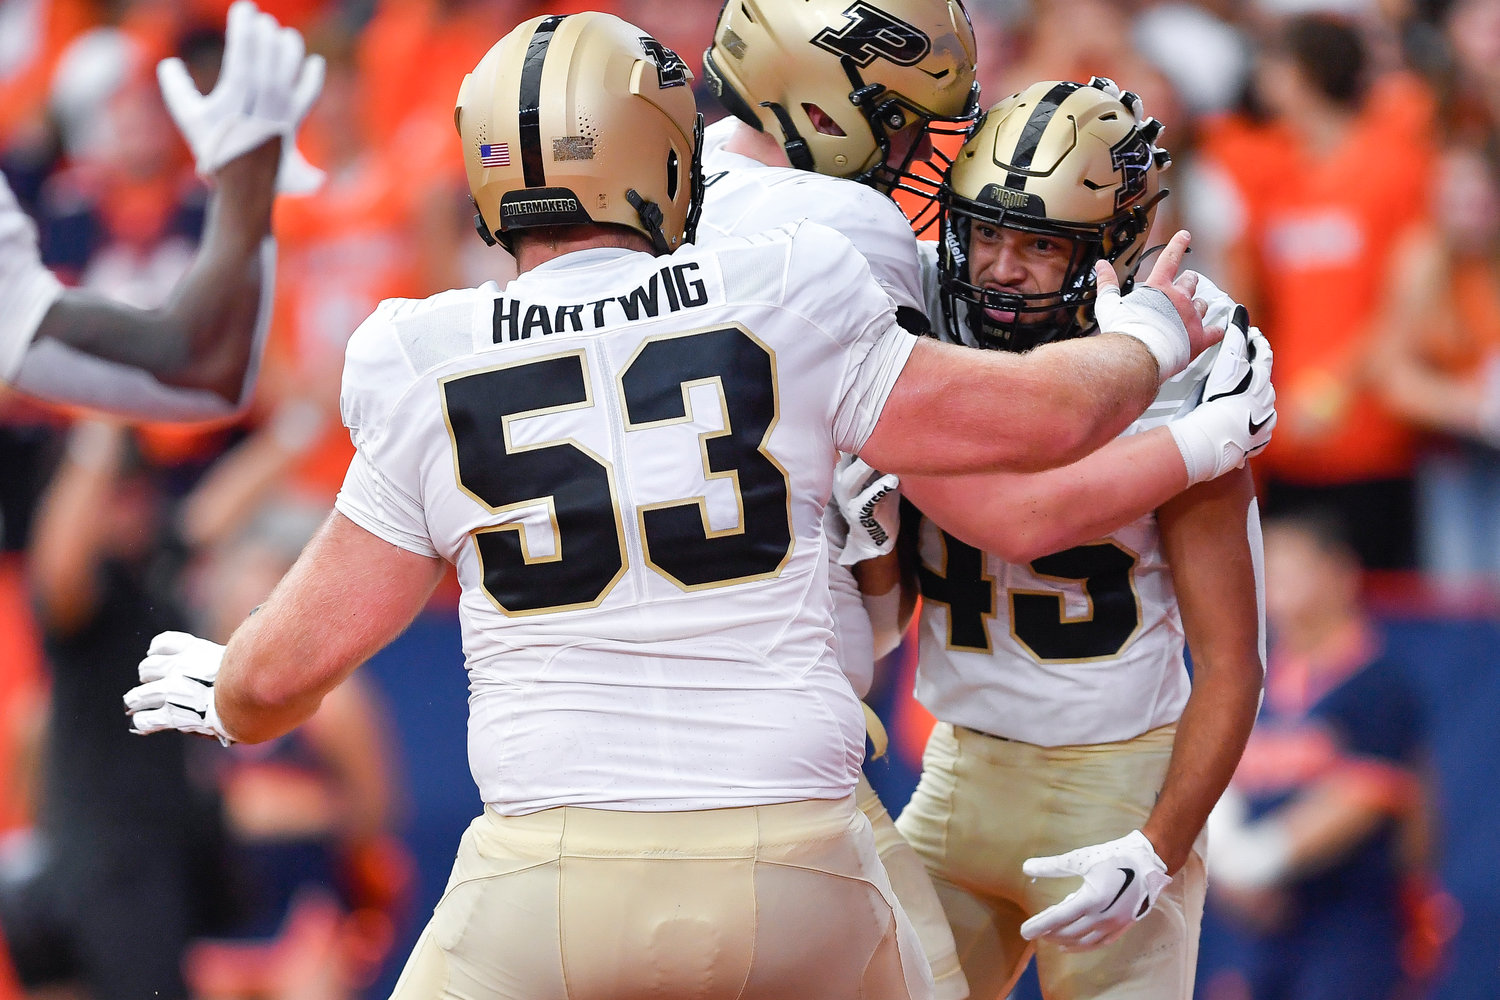 Purdue running back Devin Mockobee, right, celebrates with offensive lineman Gus Hartwig after scoring a touchdown against Syracuse during the first half of an NCAA college football game in Syracuse, N.Y., Saturday, Sept. 17, 2022.